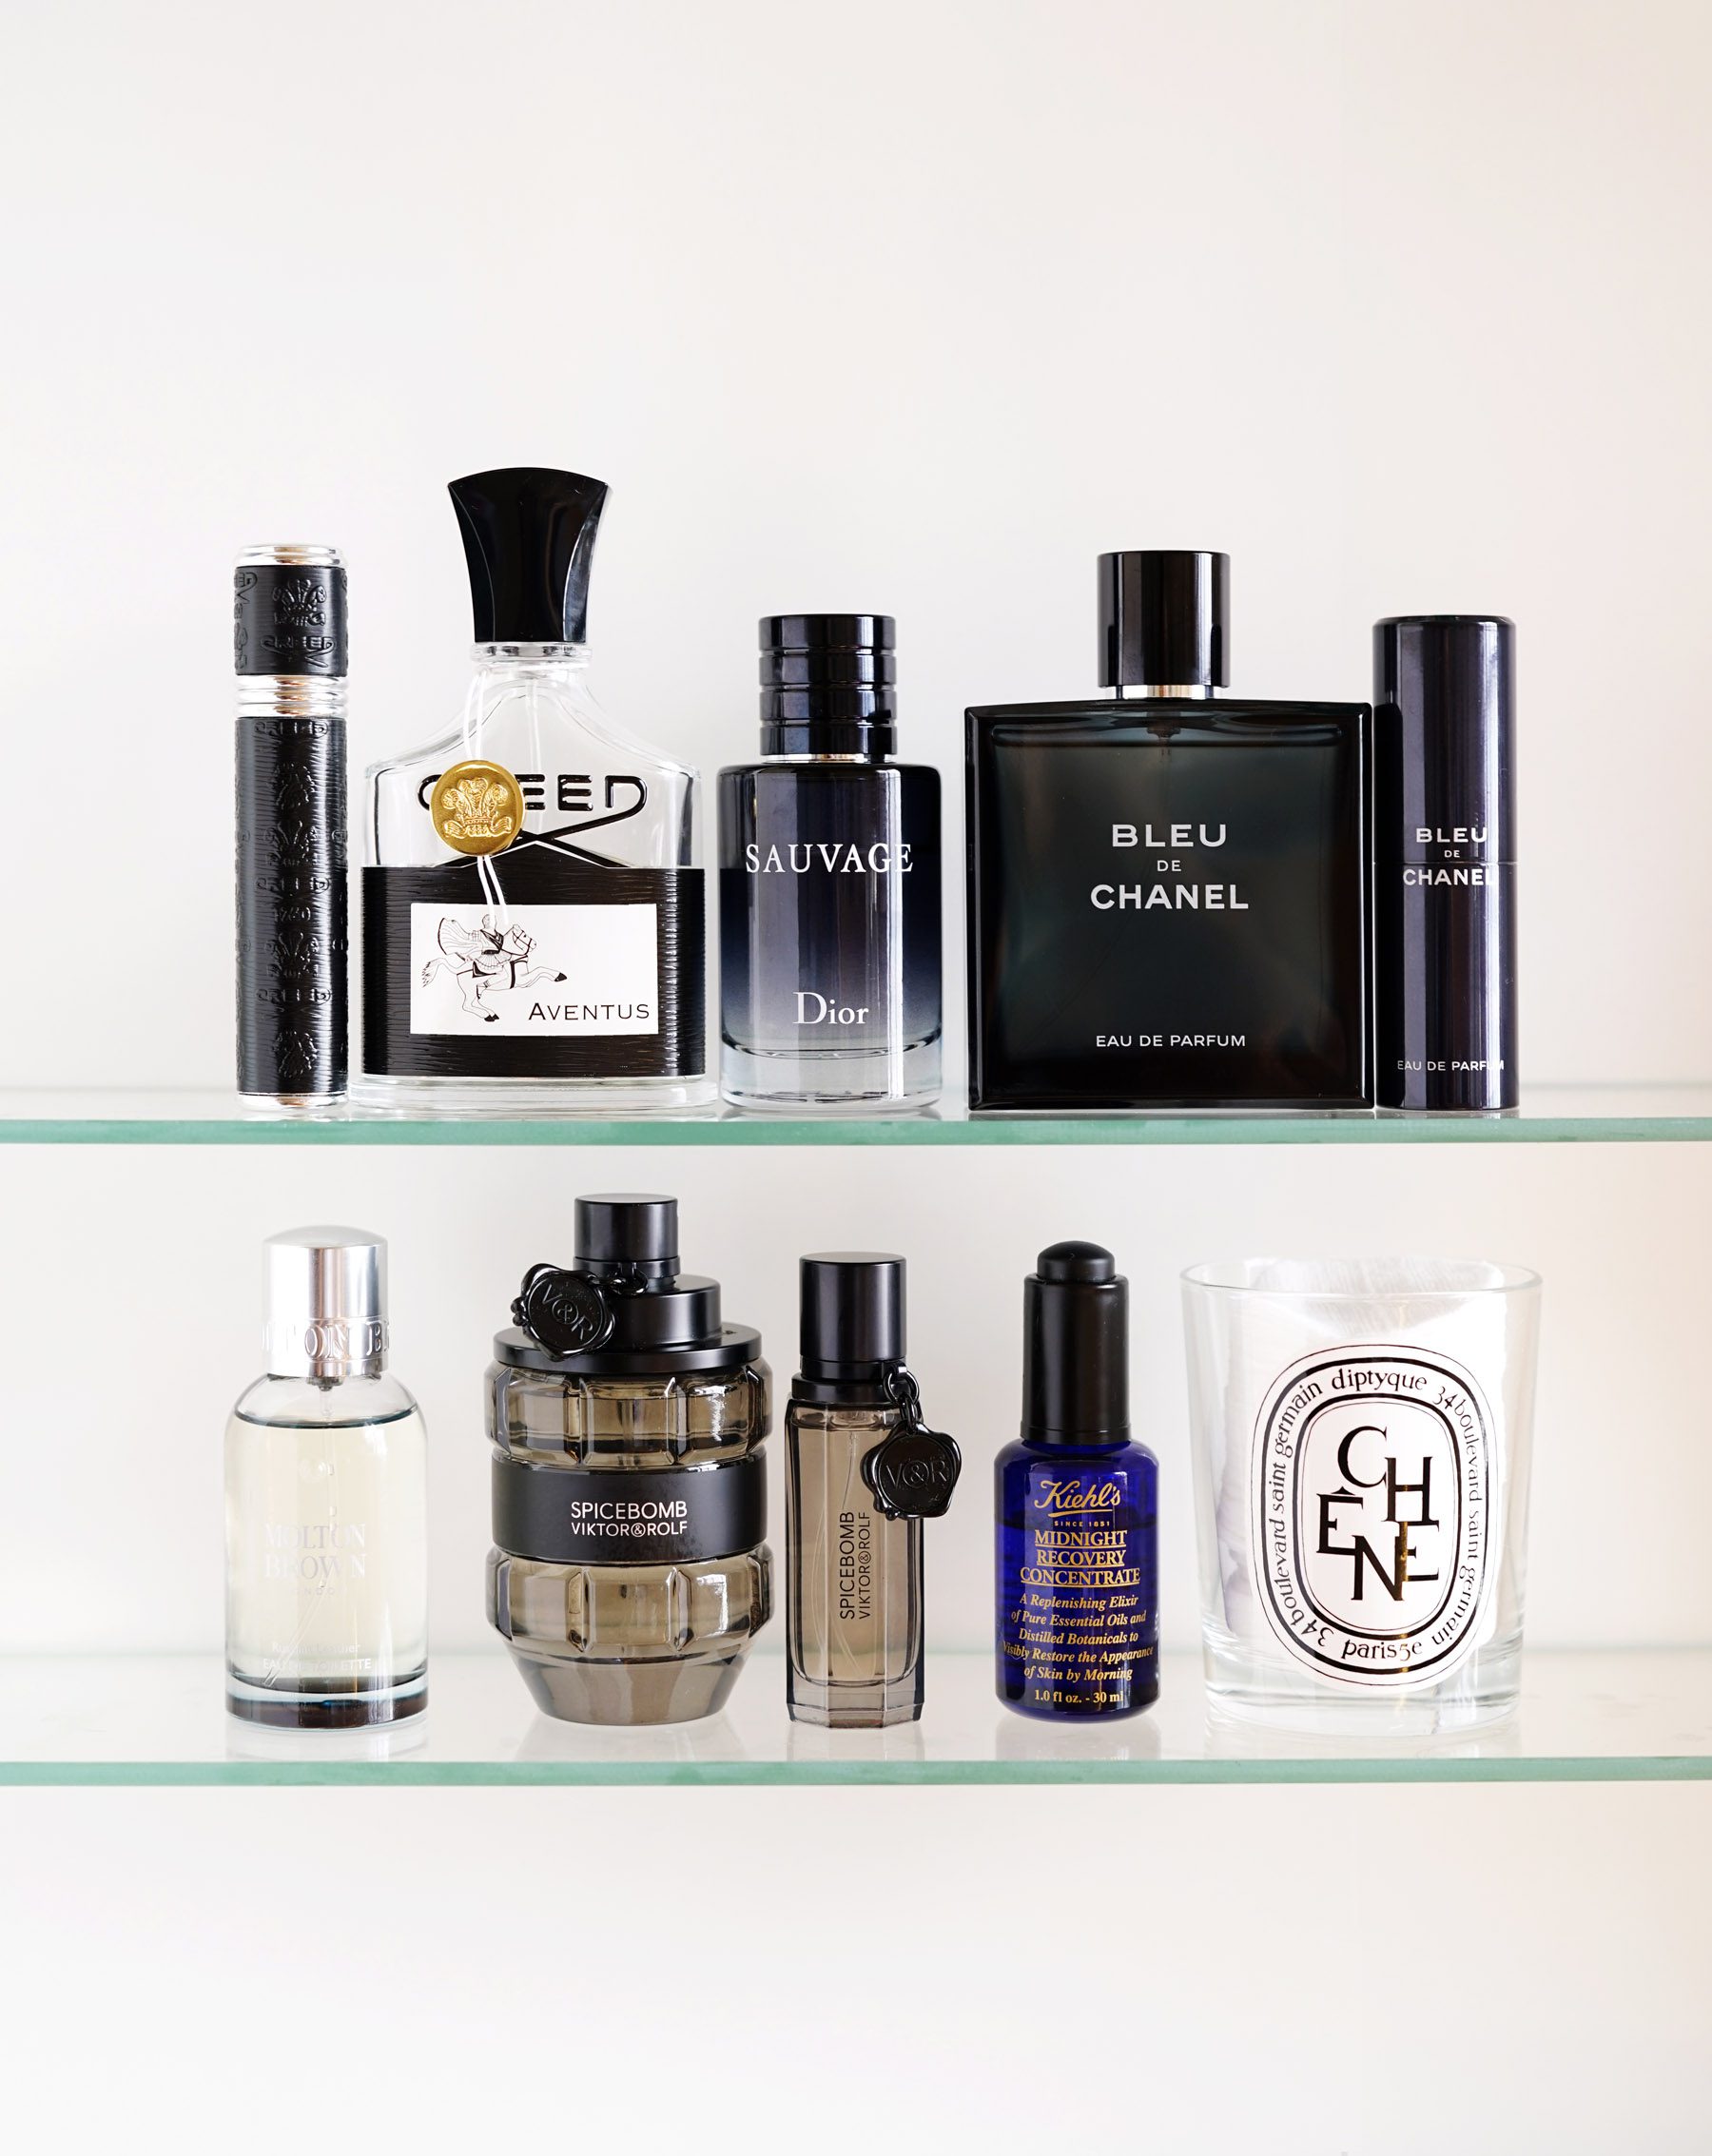 Fragrance Archives - Page 3 of 11 - The Beauty Look Book